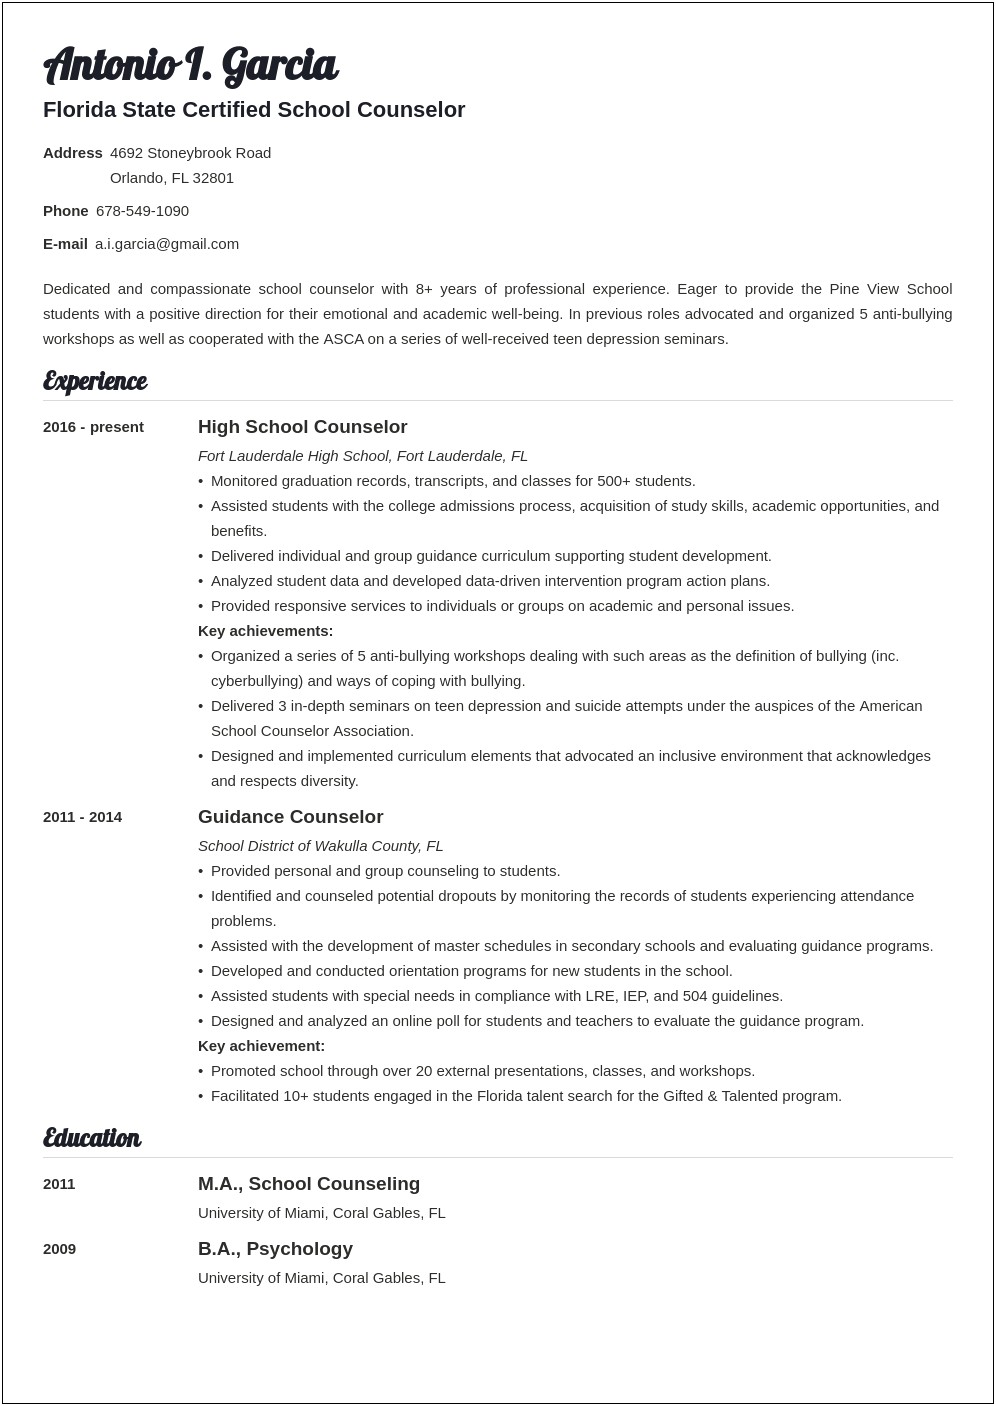 Resume Objectives For College Counelors